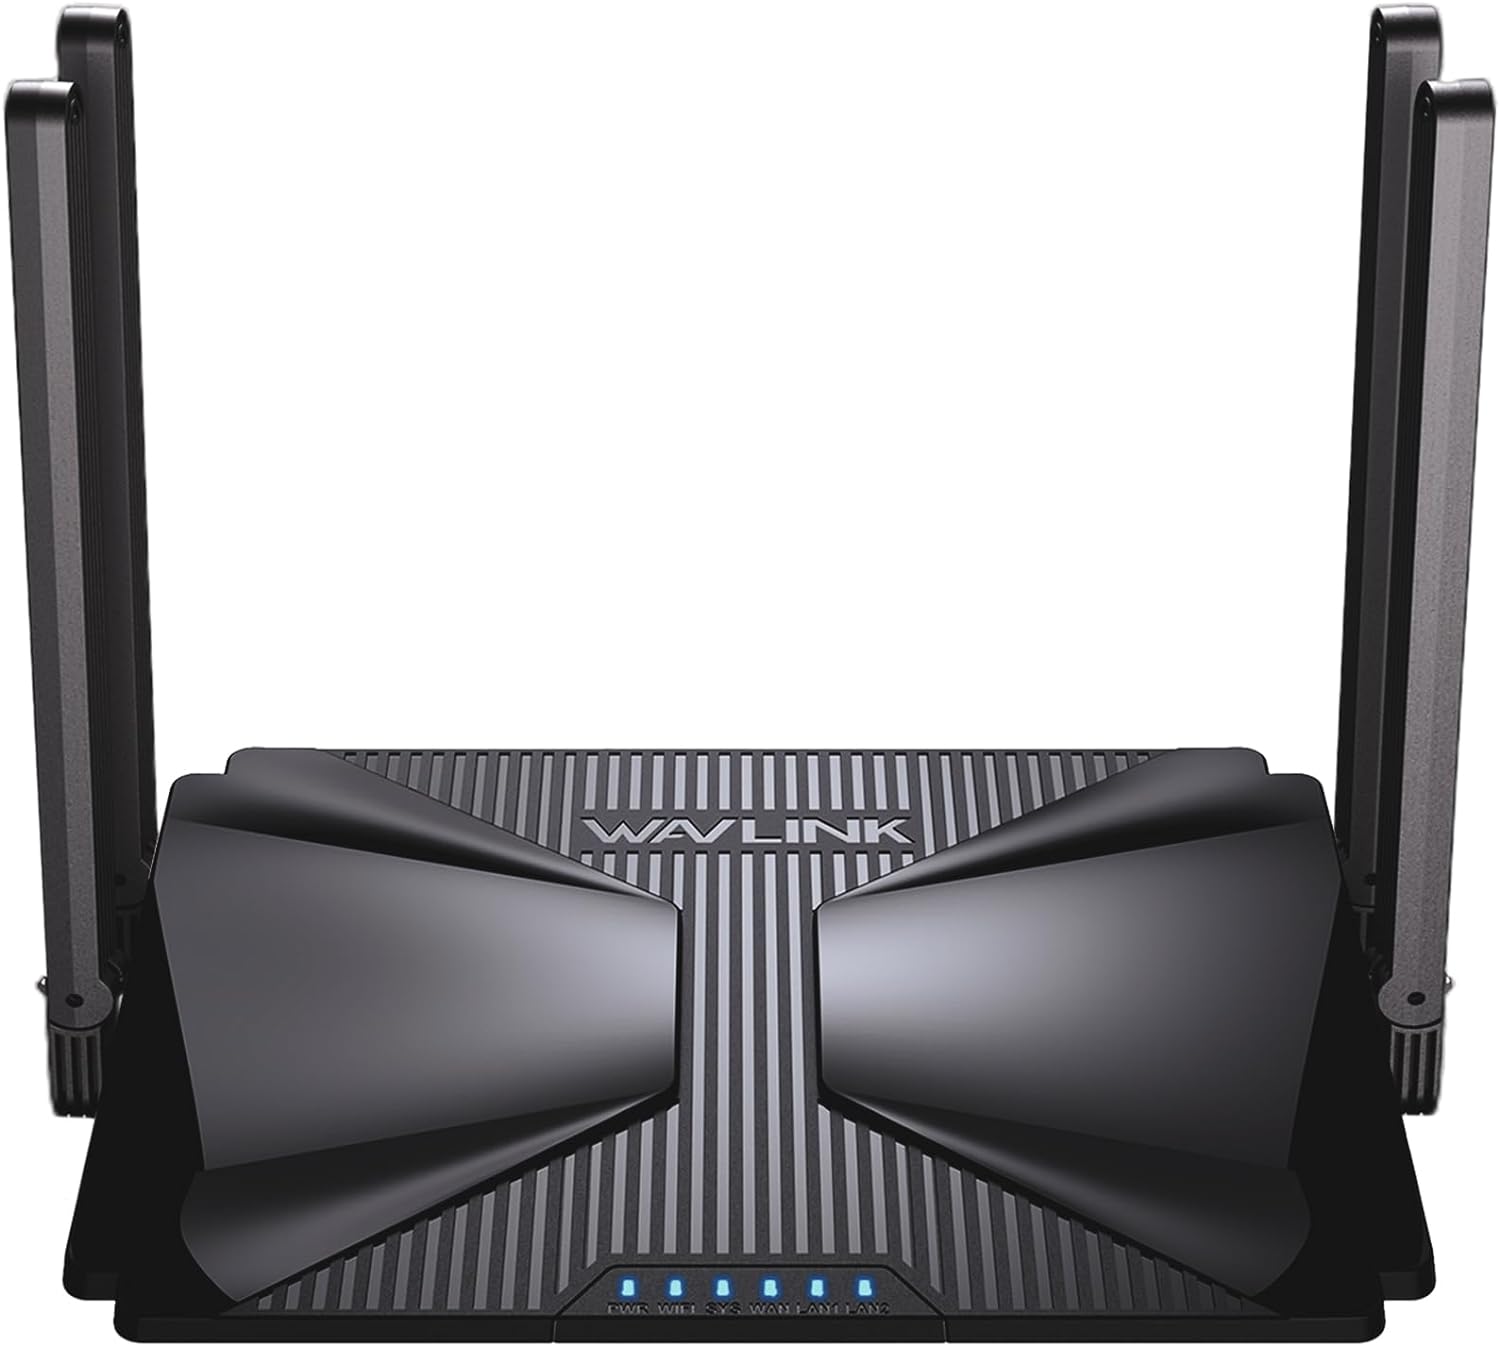 AX3000 WiFi 6 Router, WAVLINK Multi-Gigabit Mesh Router Dual Band, Mesh Support, MU-MIMO, WPA3, IPv6, Wireless Internet WiFi Router for Gaming Home $44.43